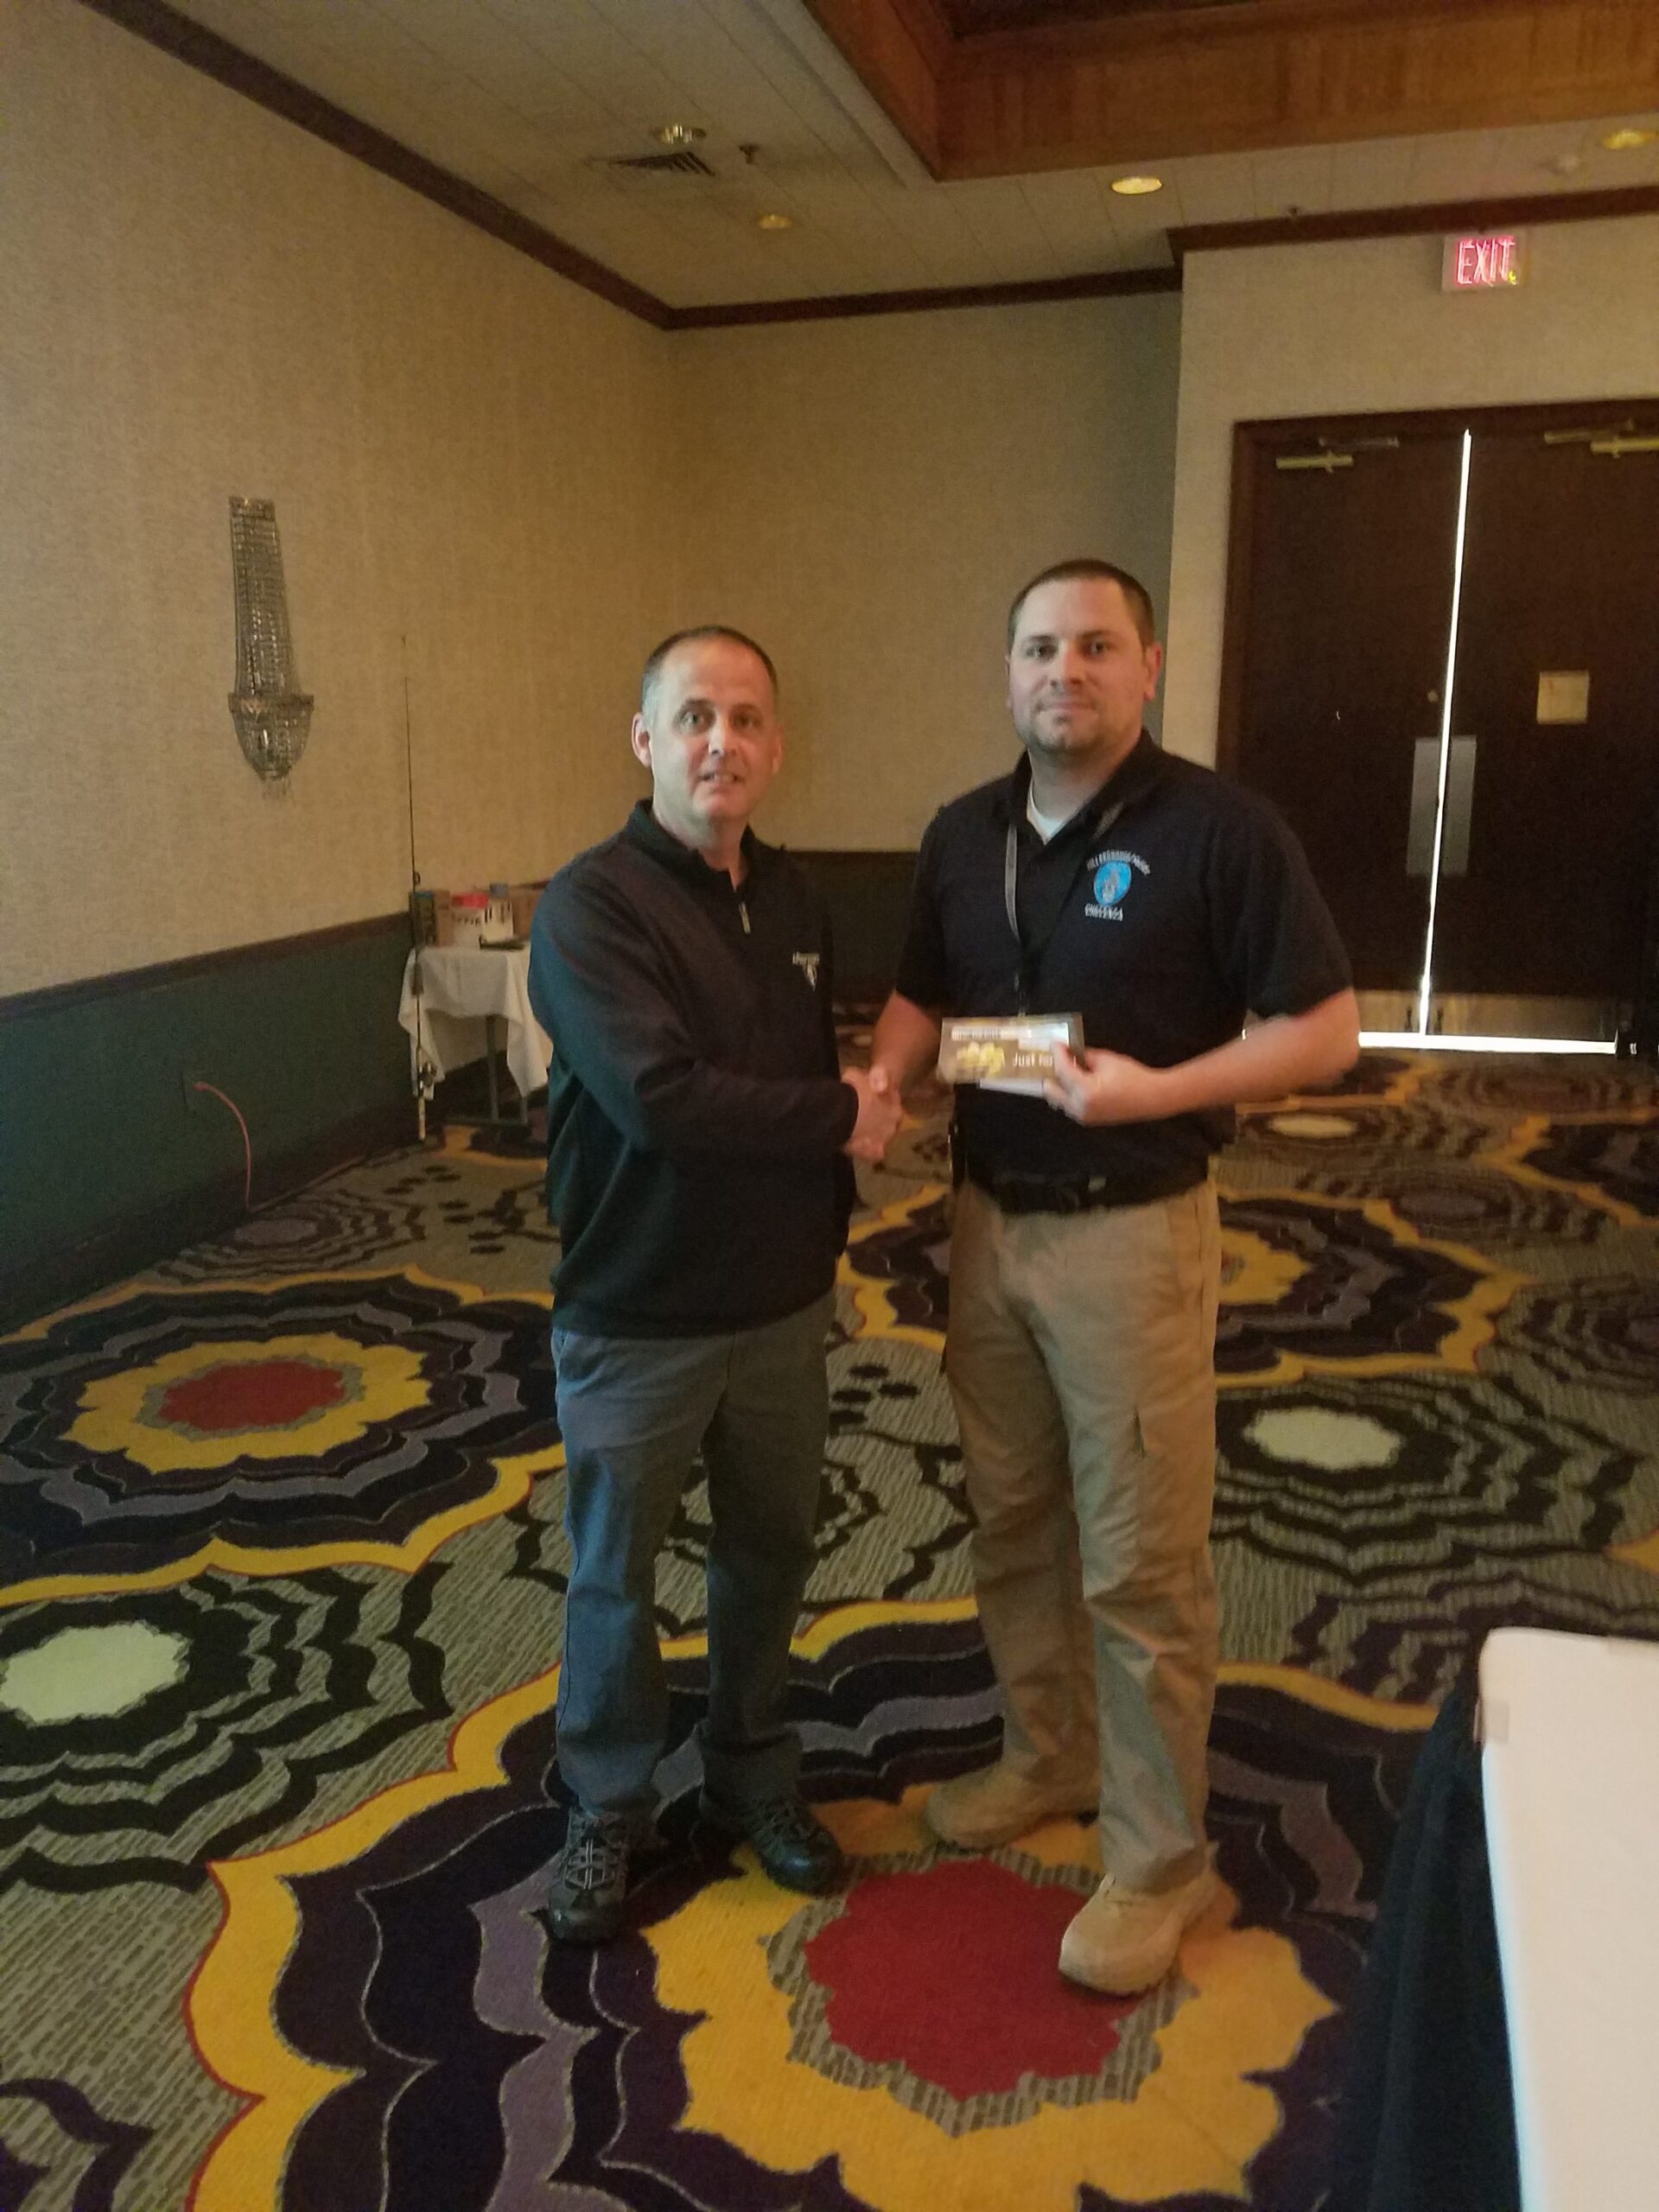 NCHIA Member and Hillsborough PD Sgt. Chelenza won a $50 gift card at the 2018 Spring Training Conference.